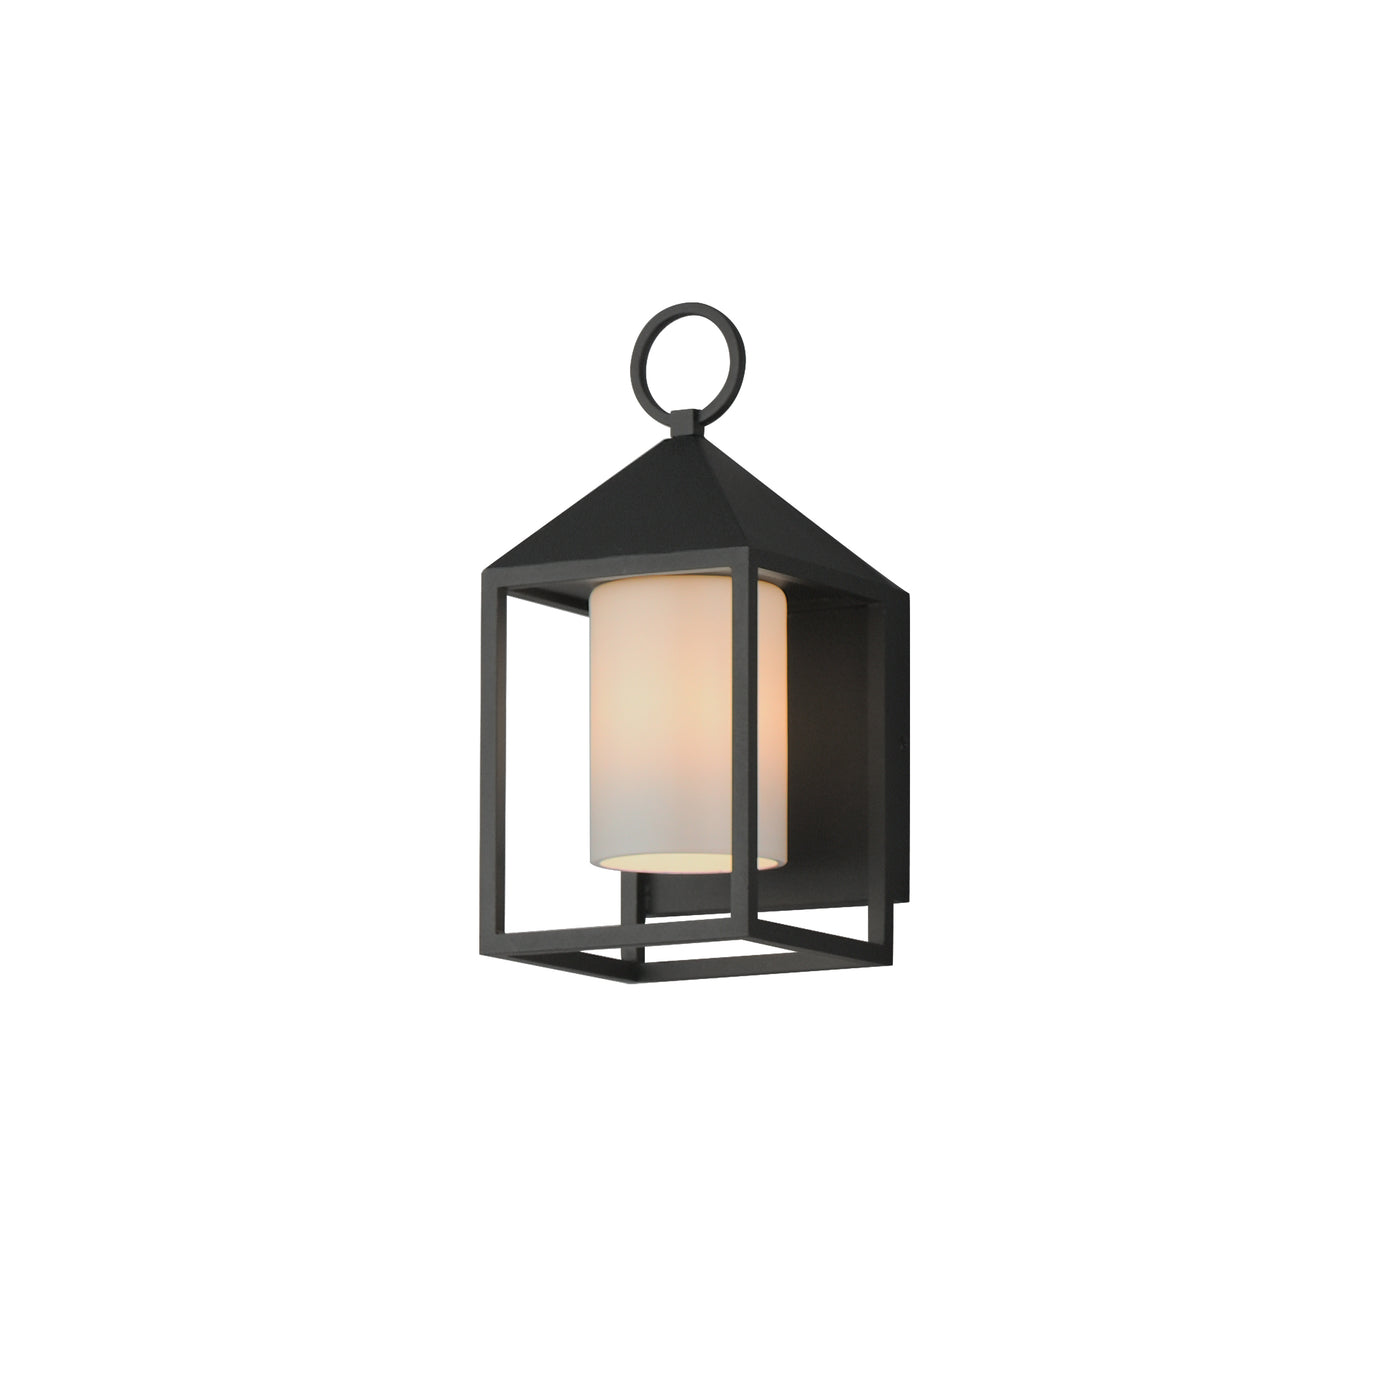 Aldous 1-Light Small Outdoor Sconce